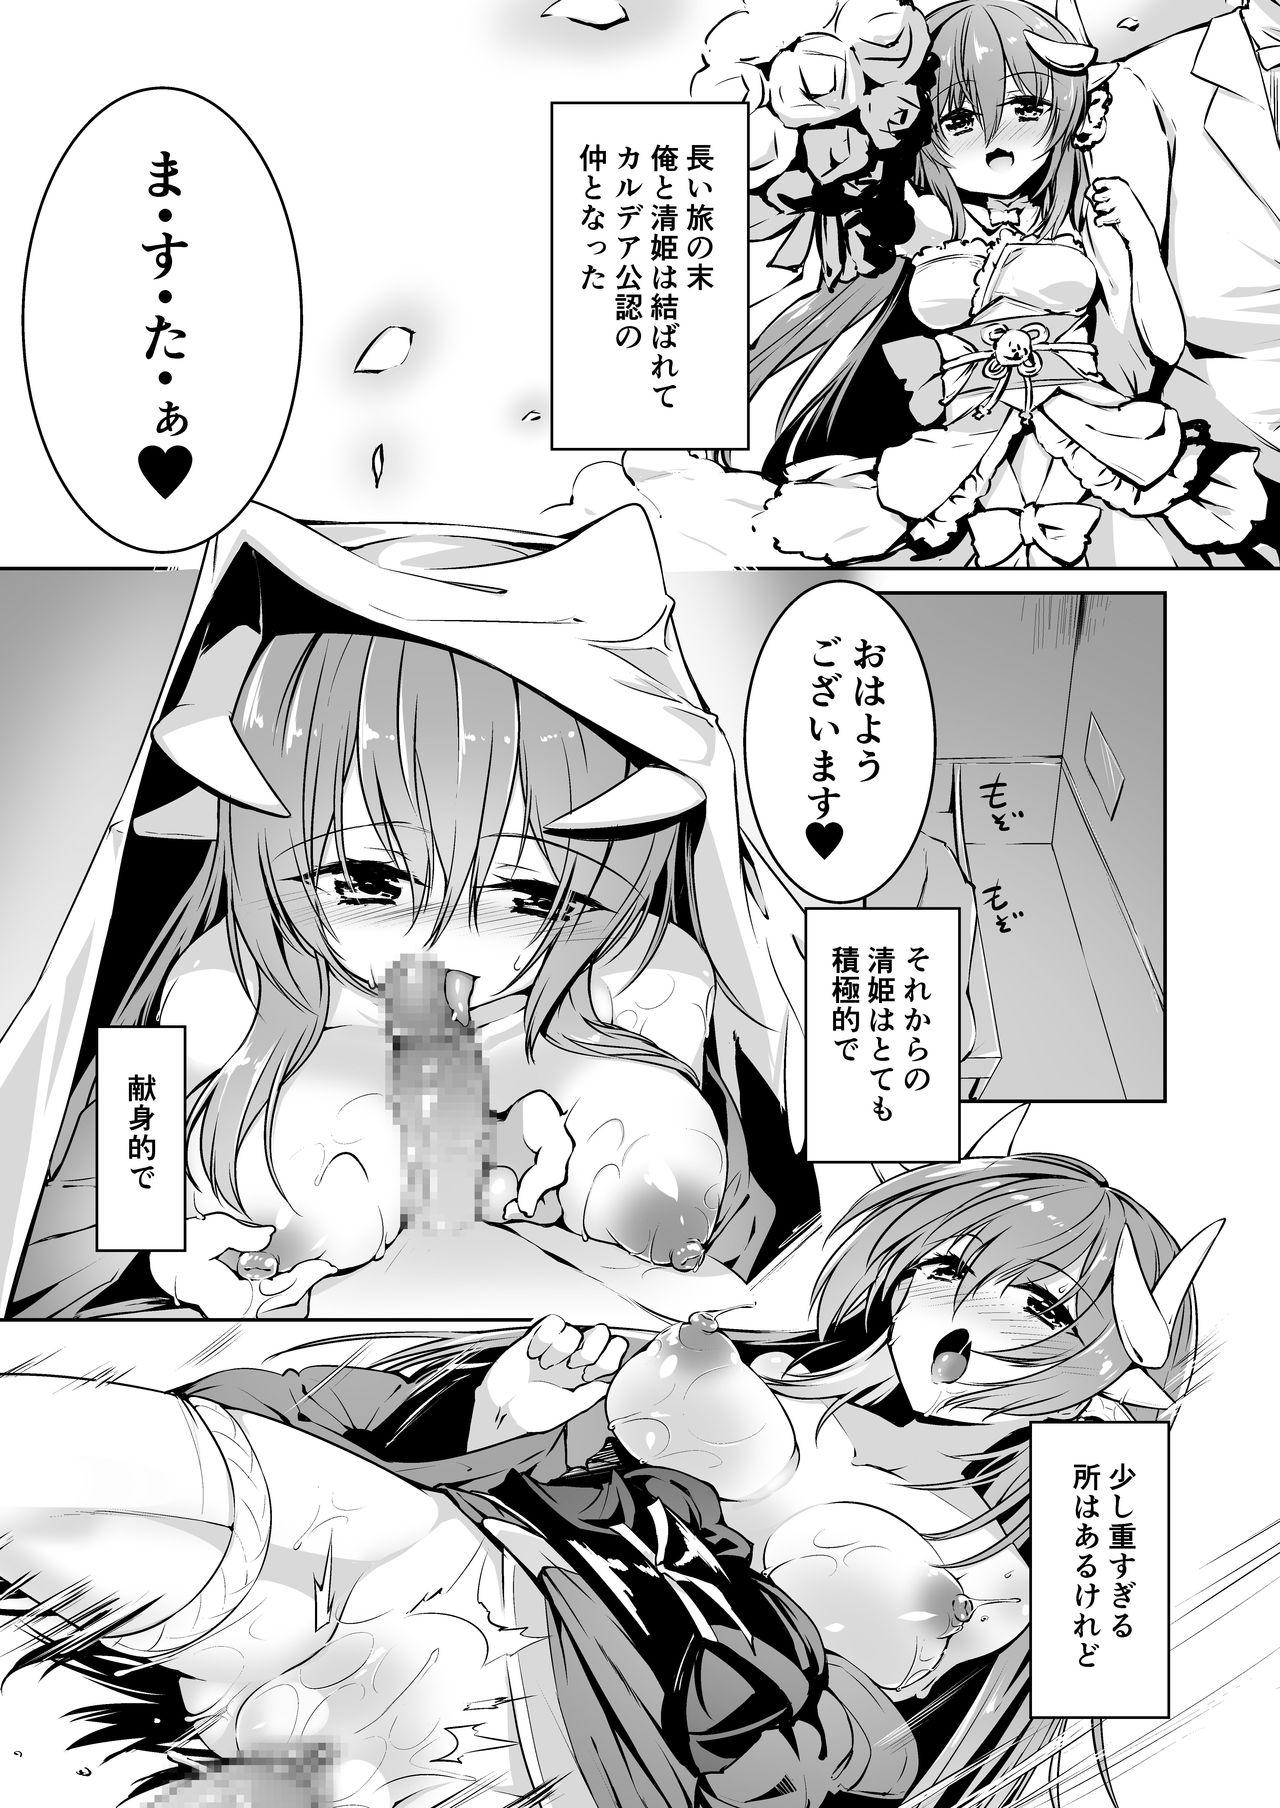 Brasileiro Kiyohime Lovers vol. 02 - Fate grand order Stepbrother - Page 4